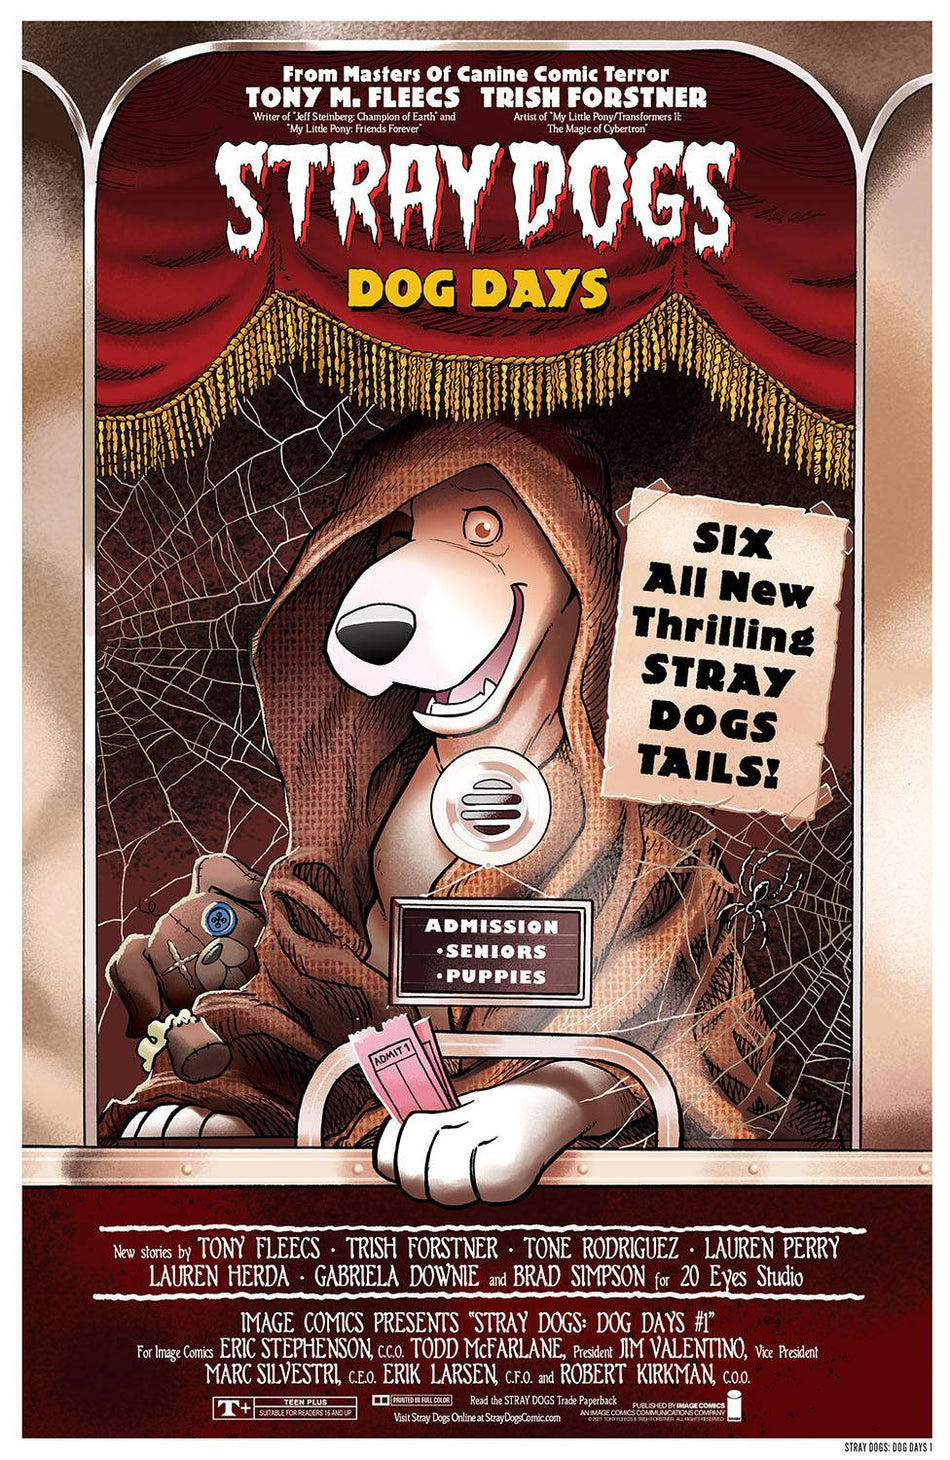 Photo of Stray Dogs Dog Days Issue 1 (of 2) CVR B Horror Movie Var comic sold by Stronghold Collectibles